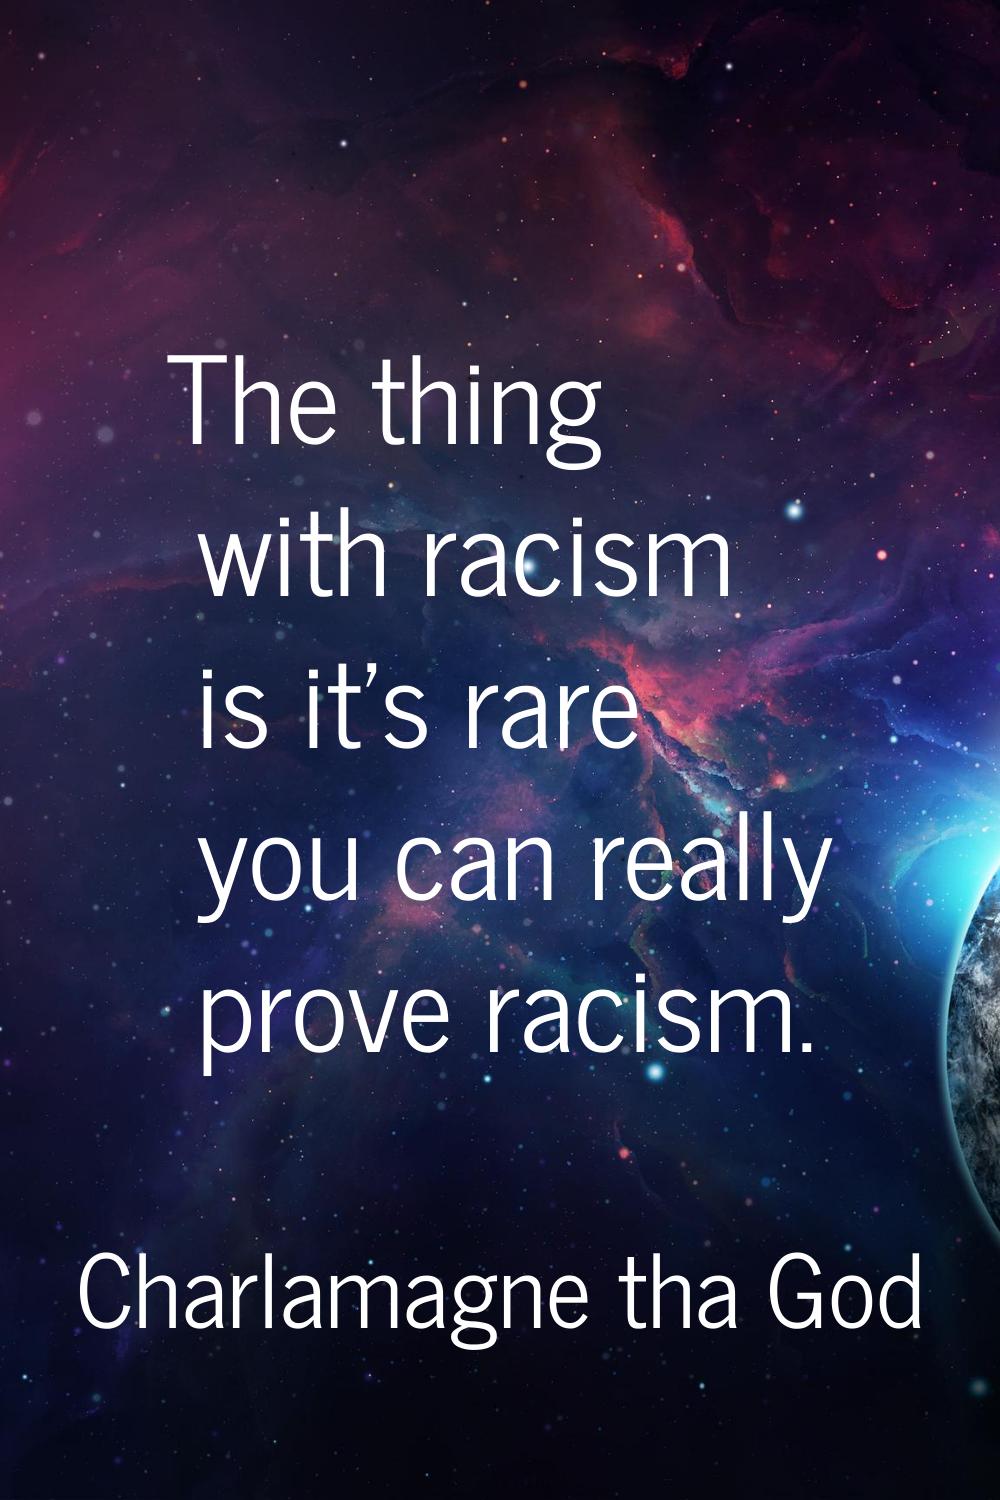 The thing with racism is it's rare you can really prove racism.